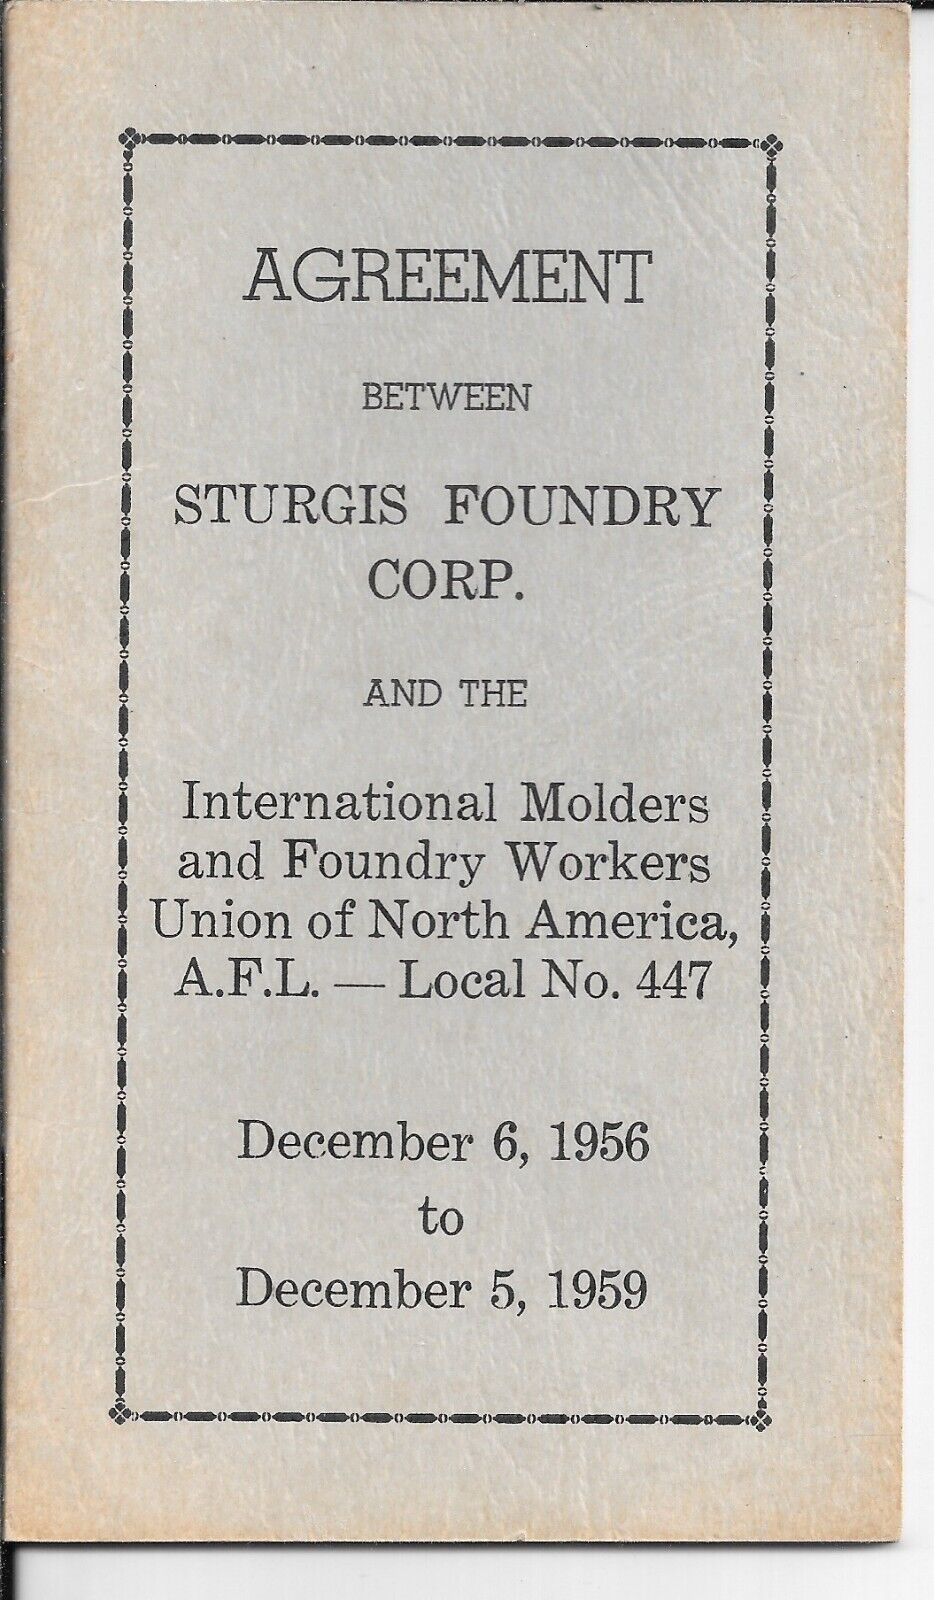 1956 STURGIS FOUNDRY CORP & INTERNATIONAL MOLDERS and FOUNDRY WORKERS UNION